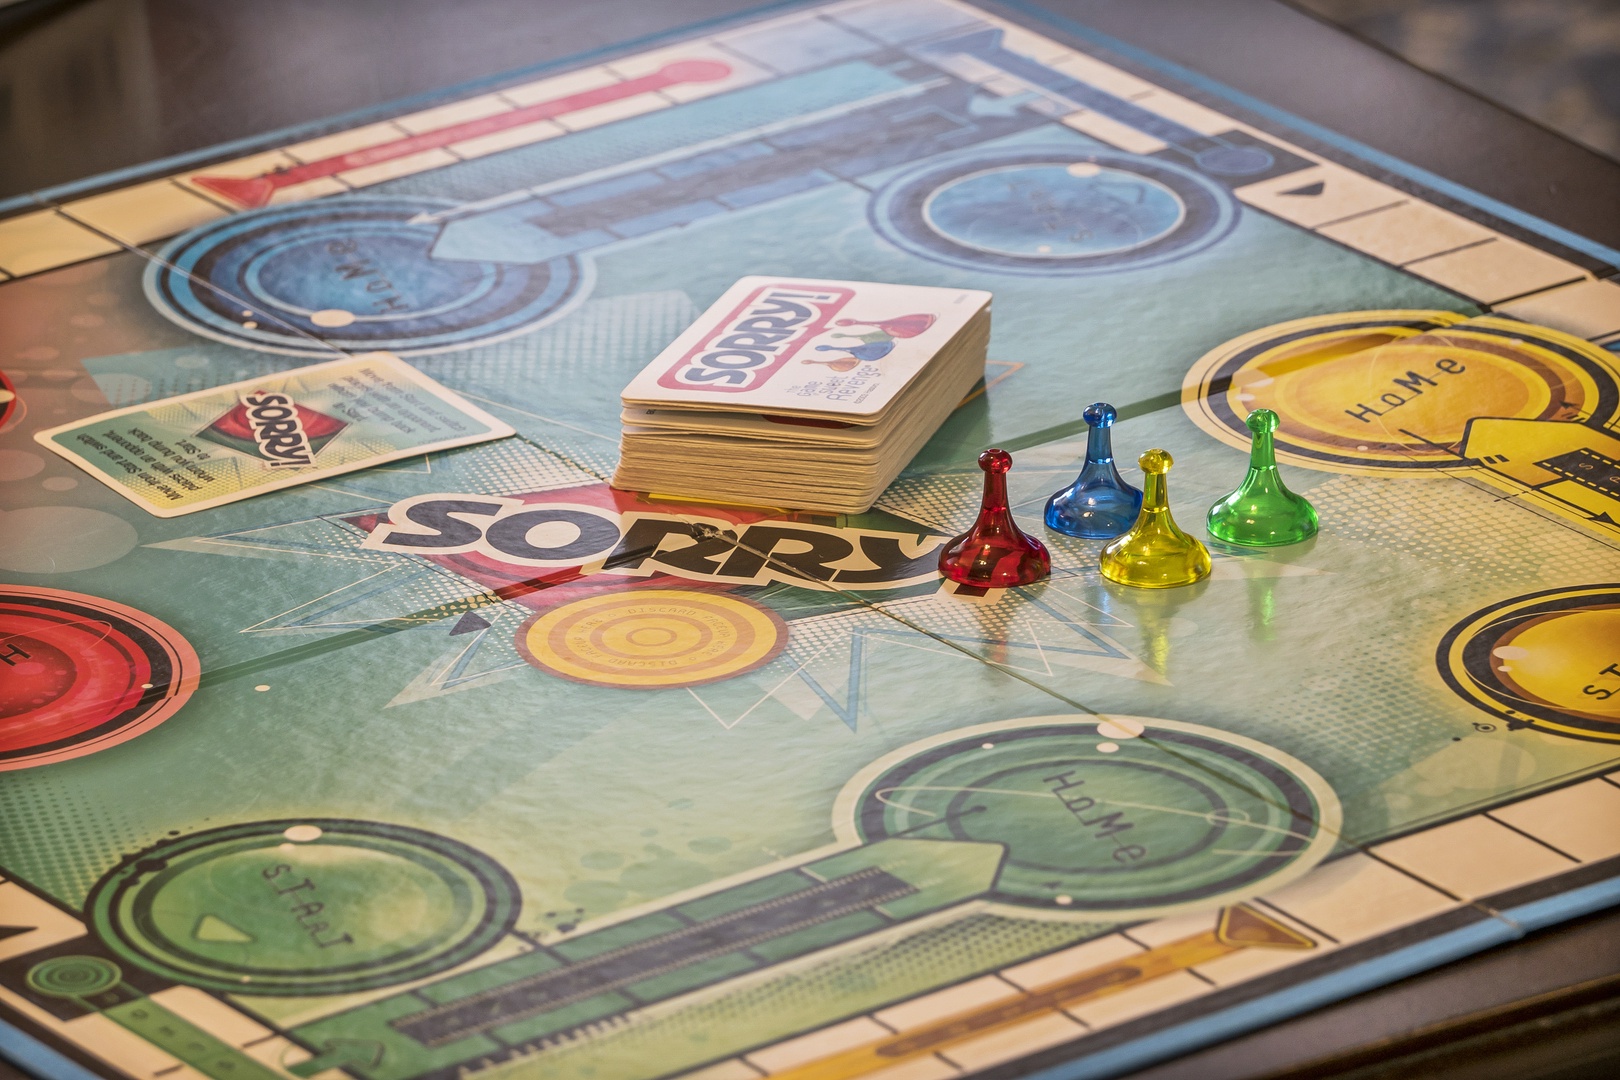 Enjoy a competitive family game night at home! #GameOn